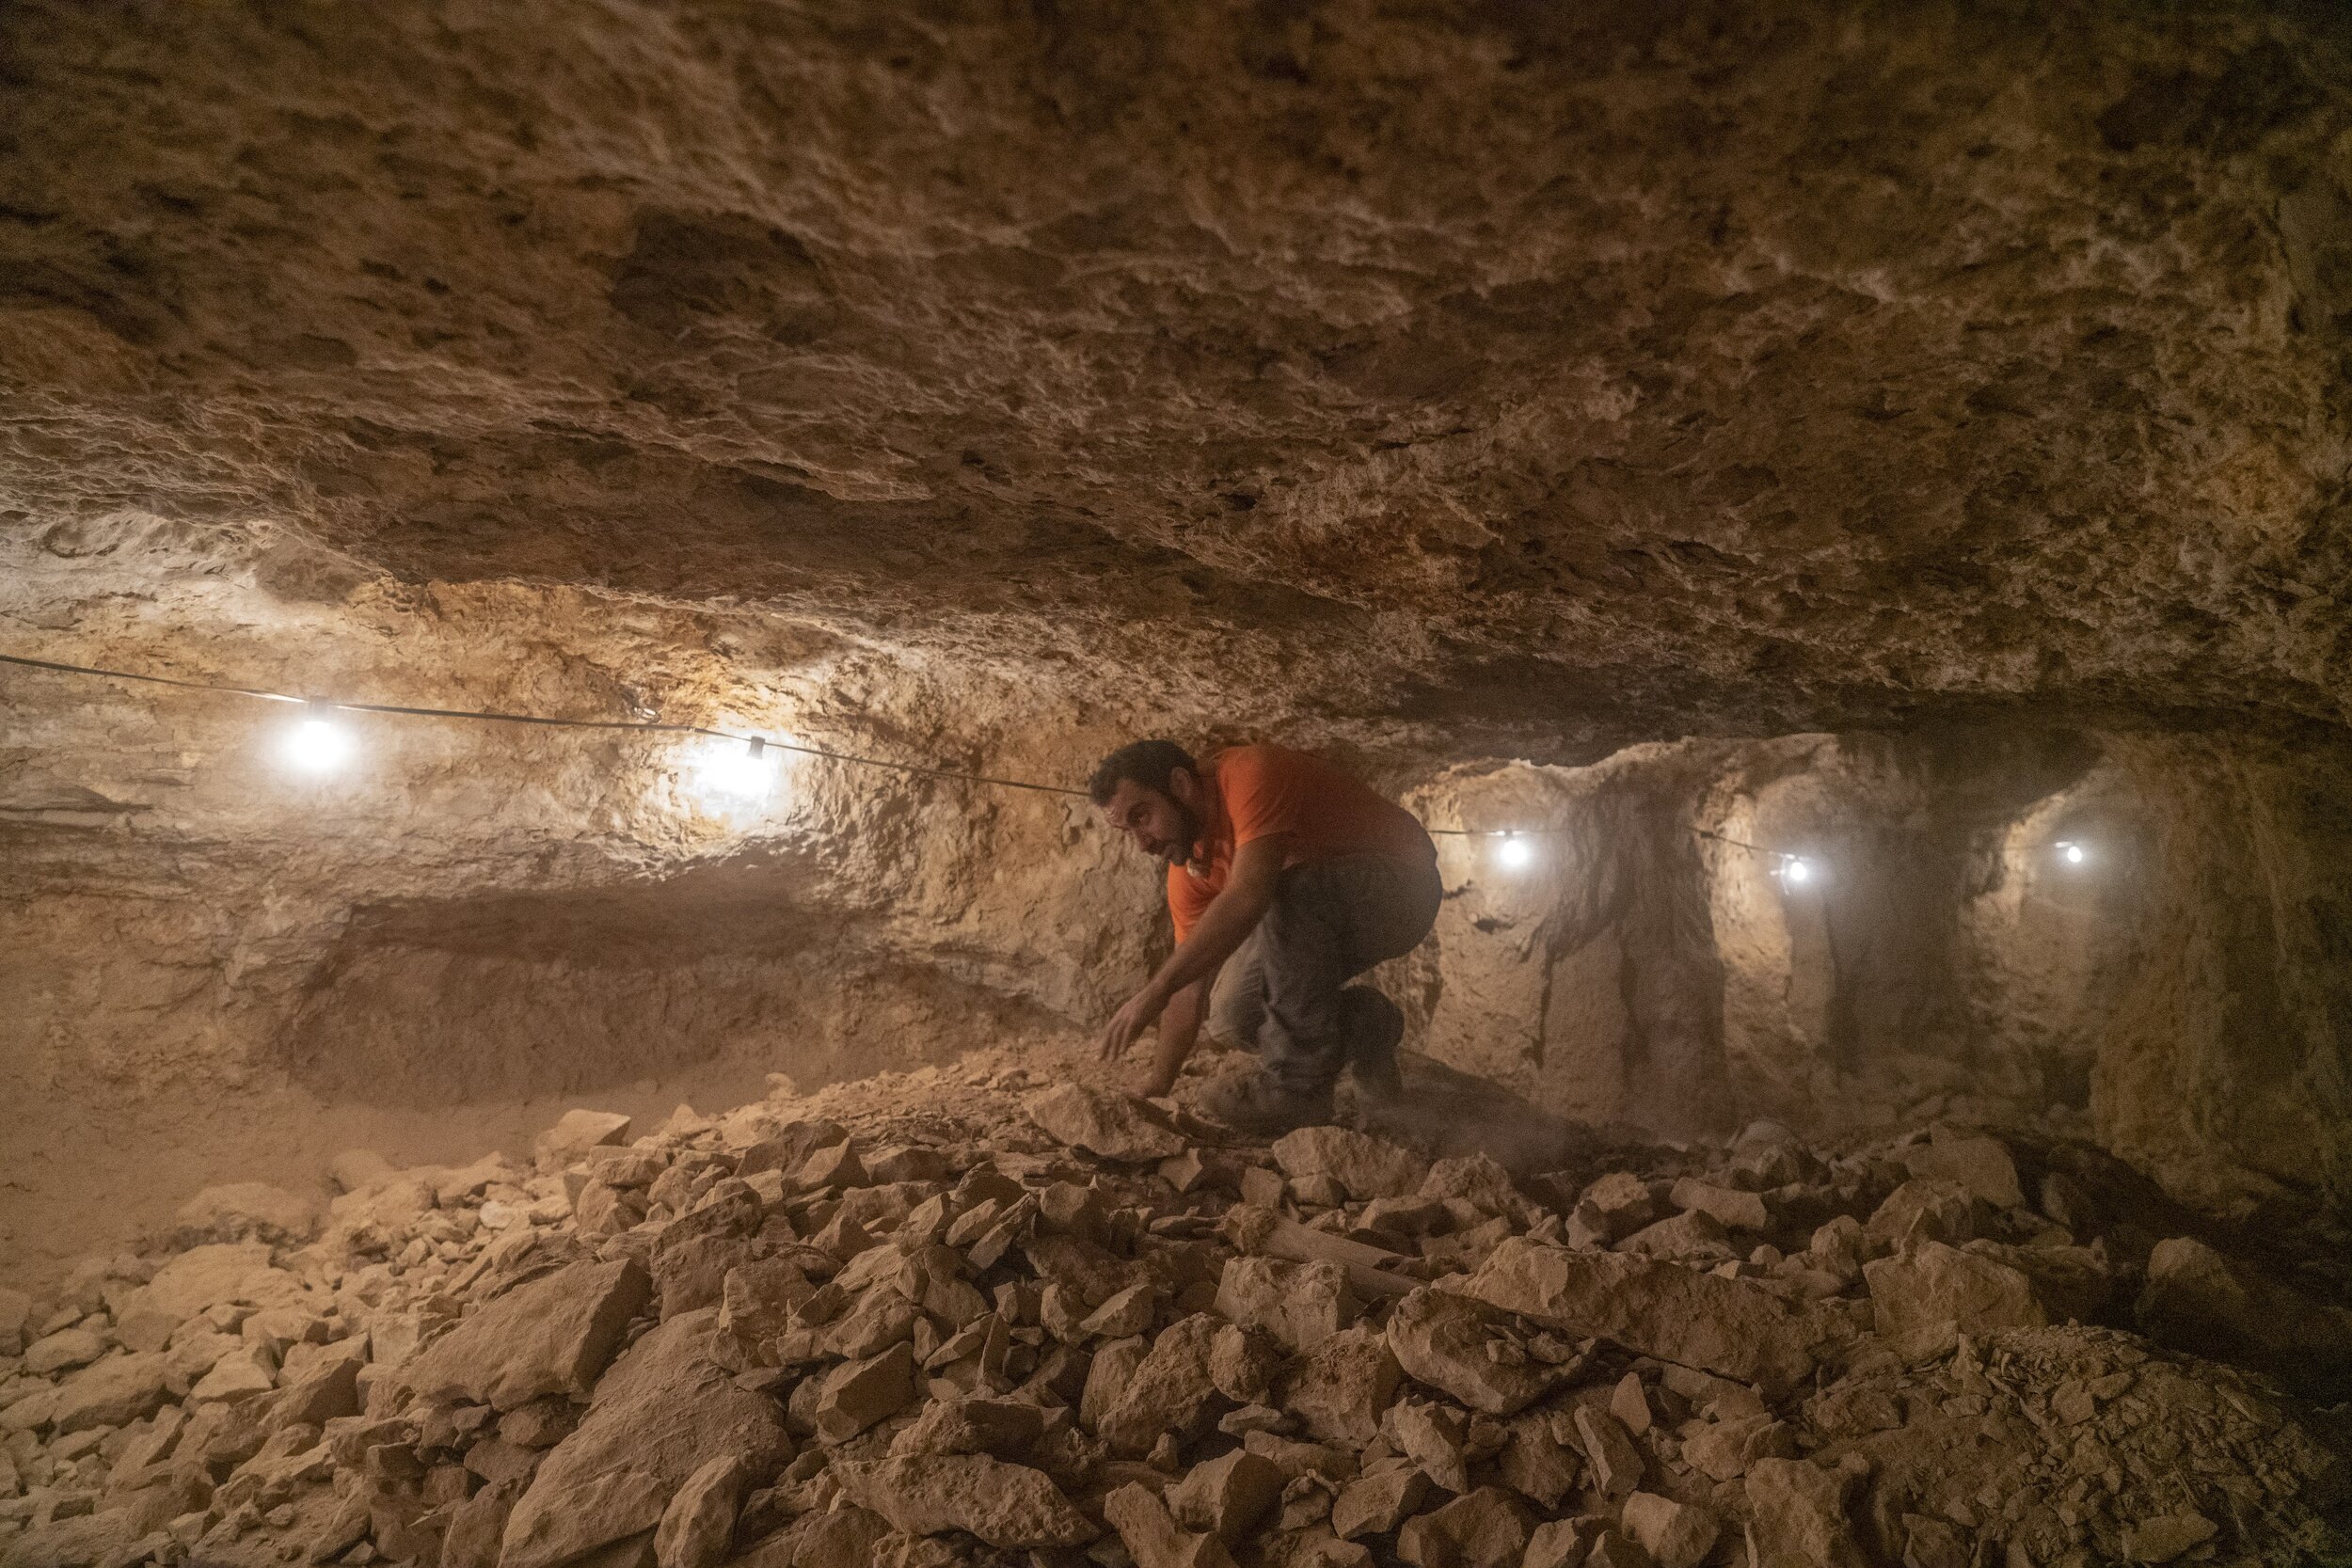 47.The excavation was conducted under challenging conditions. Photo Yaniv Berman Israel Antiquities Authority.jpg